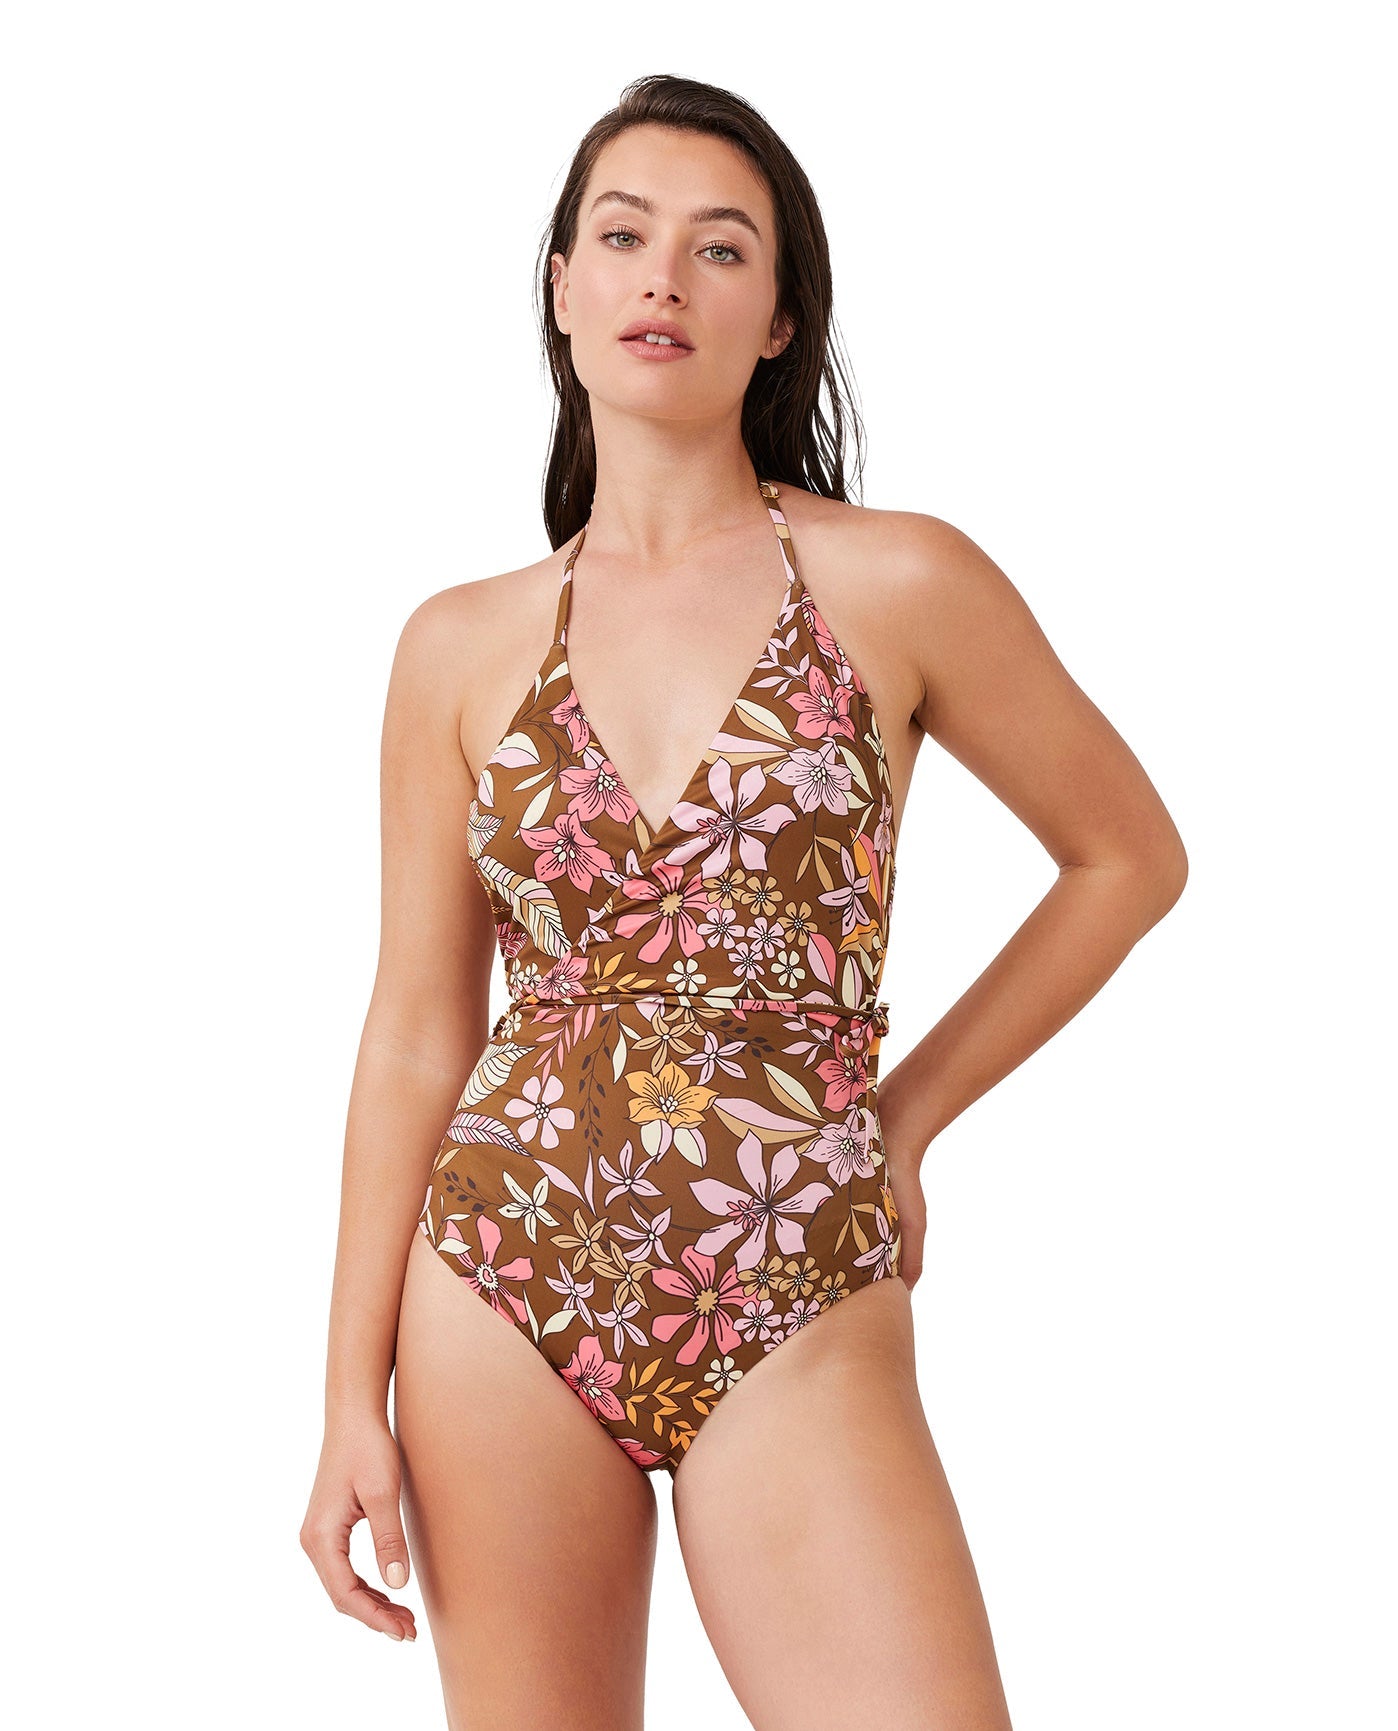 🌸 // GOTTEX MISS BUTTERFLY SURPLICE ONE PIECE SWIMSUIT // 🌸 come